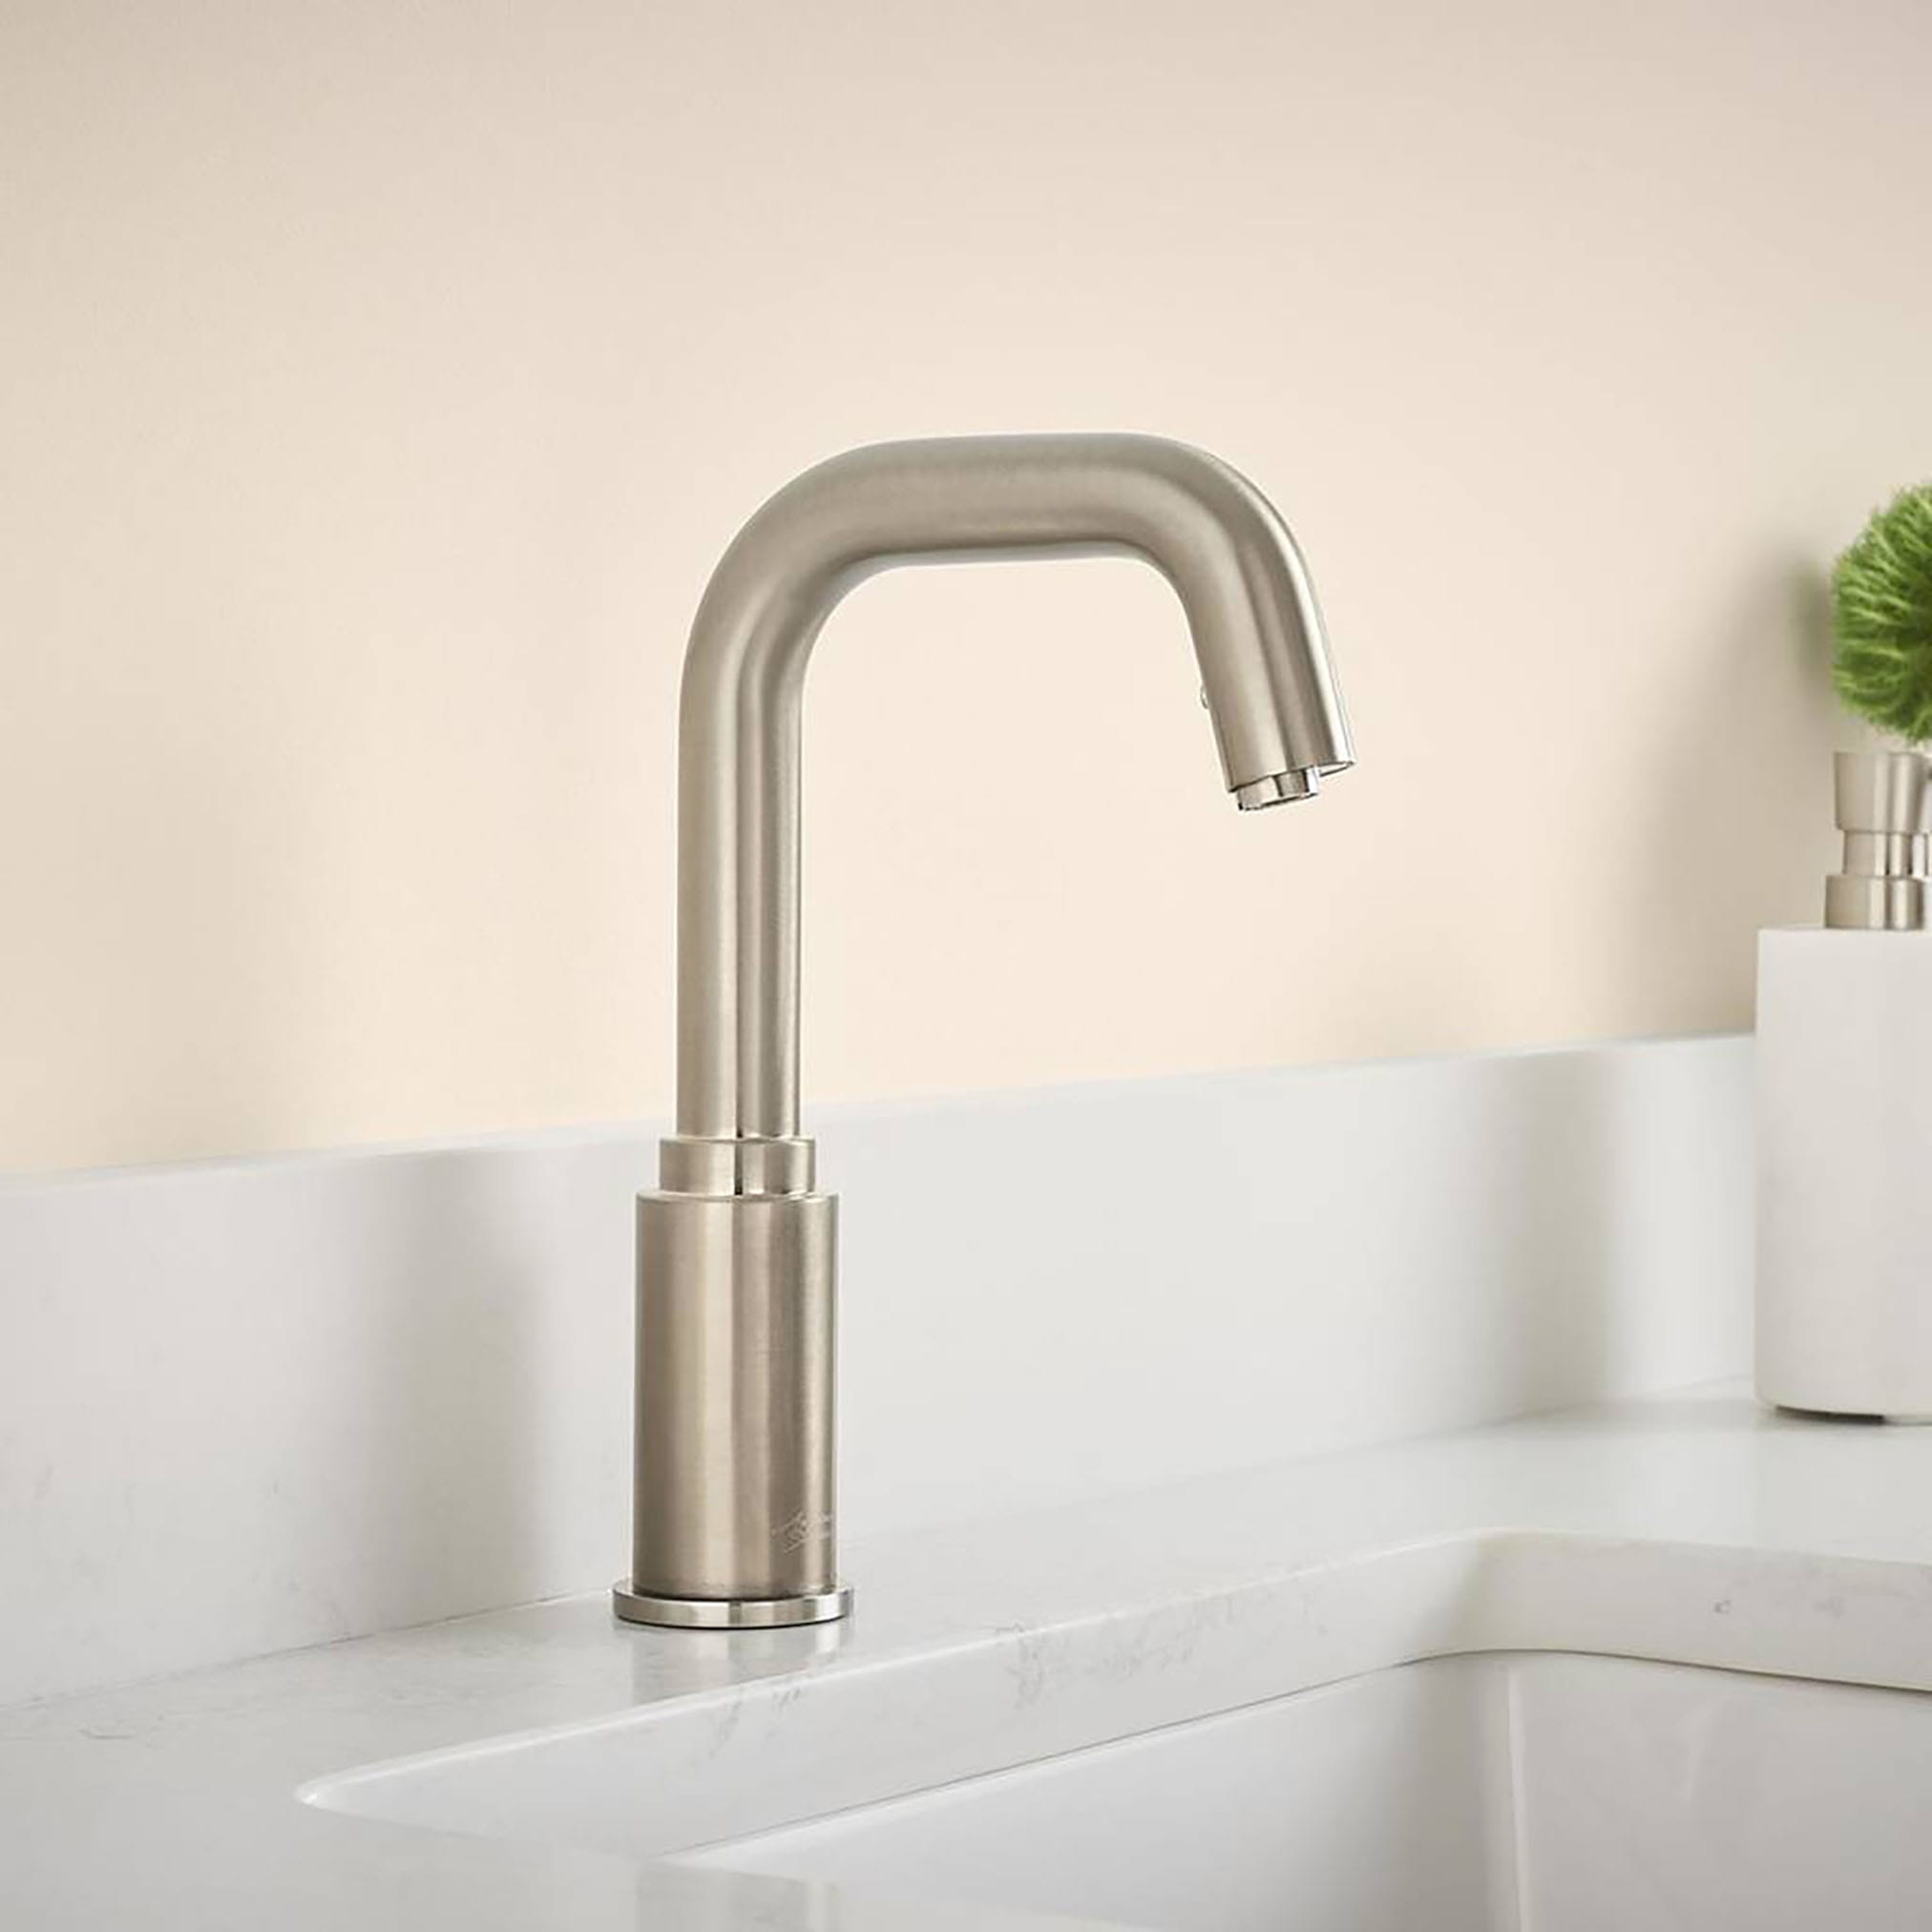 Serin® Touchless Faucet, Battery-Powered, 1.5 gpm/5.7 Lpm